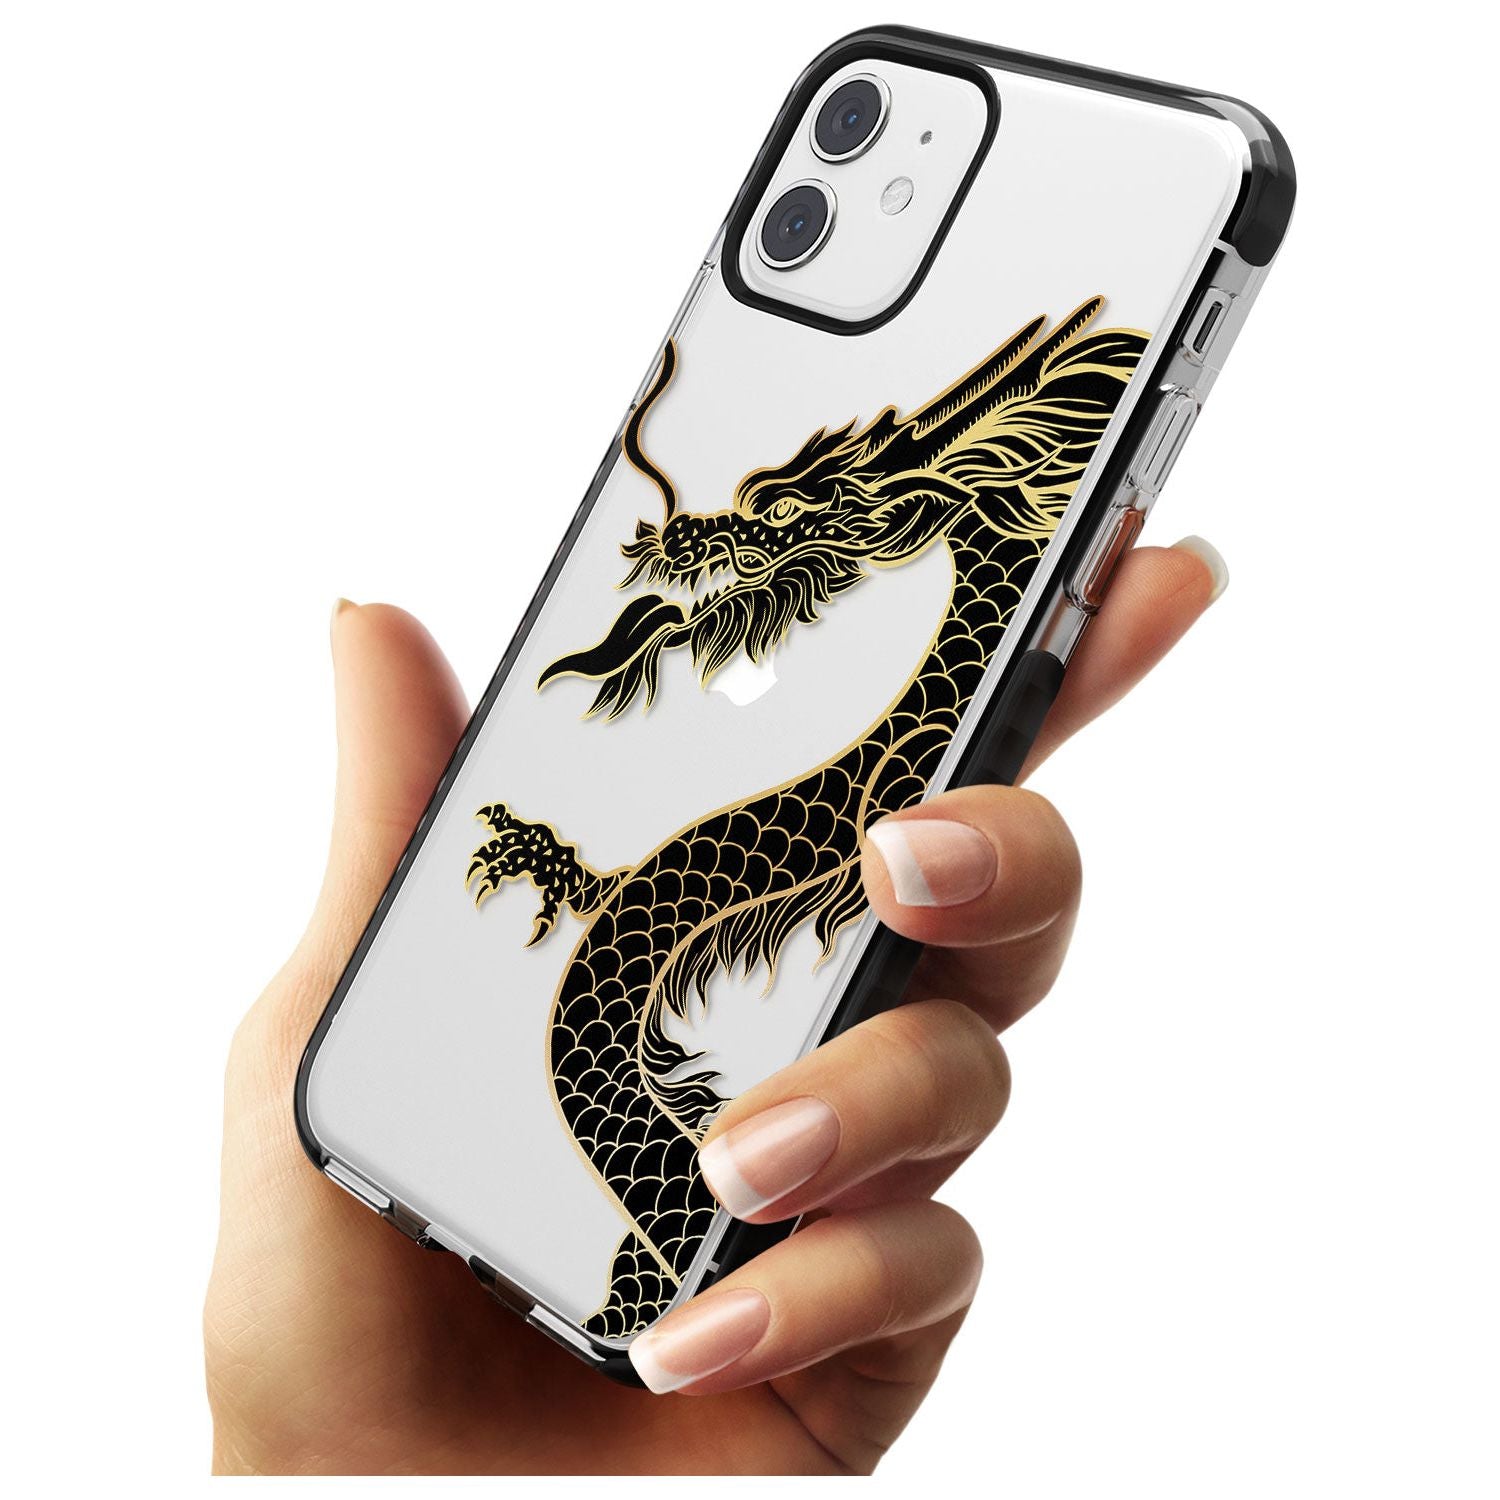 Large Red Dragon Black Impact Phone Case for iPhone 11 Pro Max